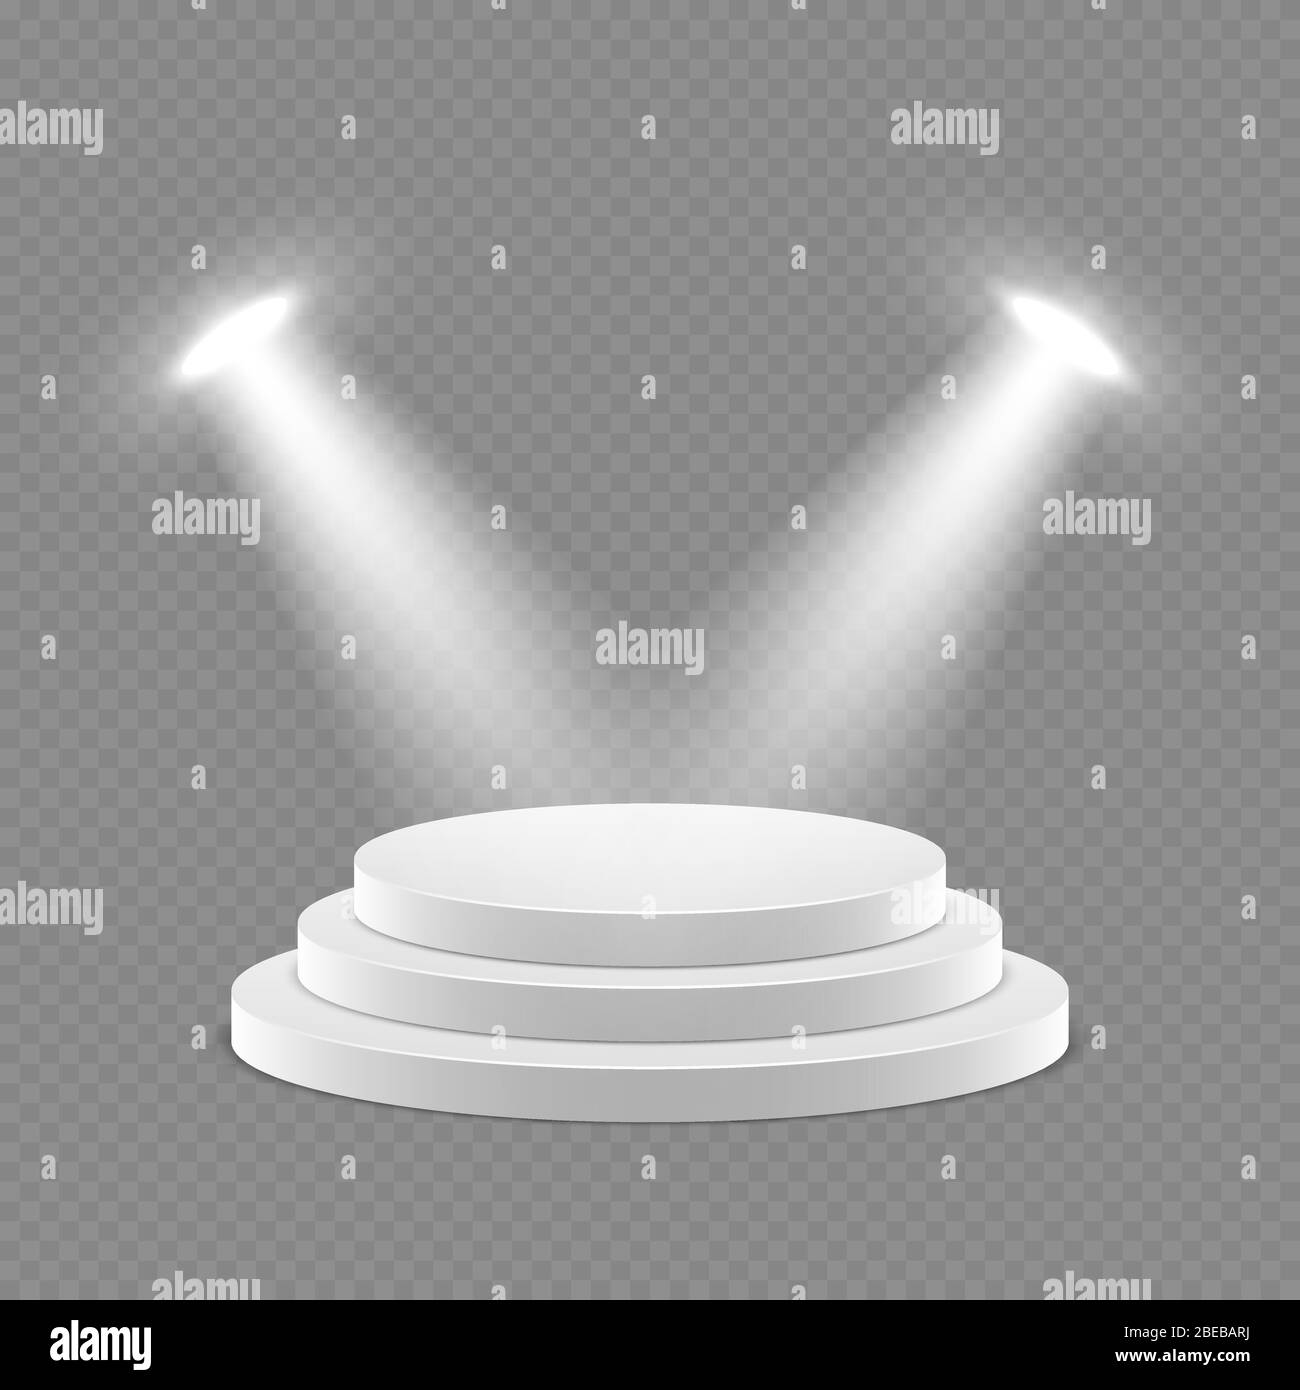 Vector 3d pedestal with spotlights isolated object. Pedestal and podium empty illuminated illustration Stock Vector